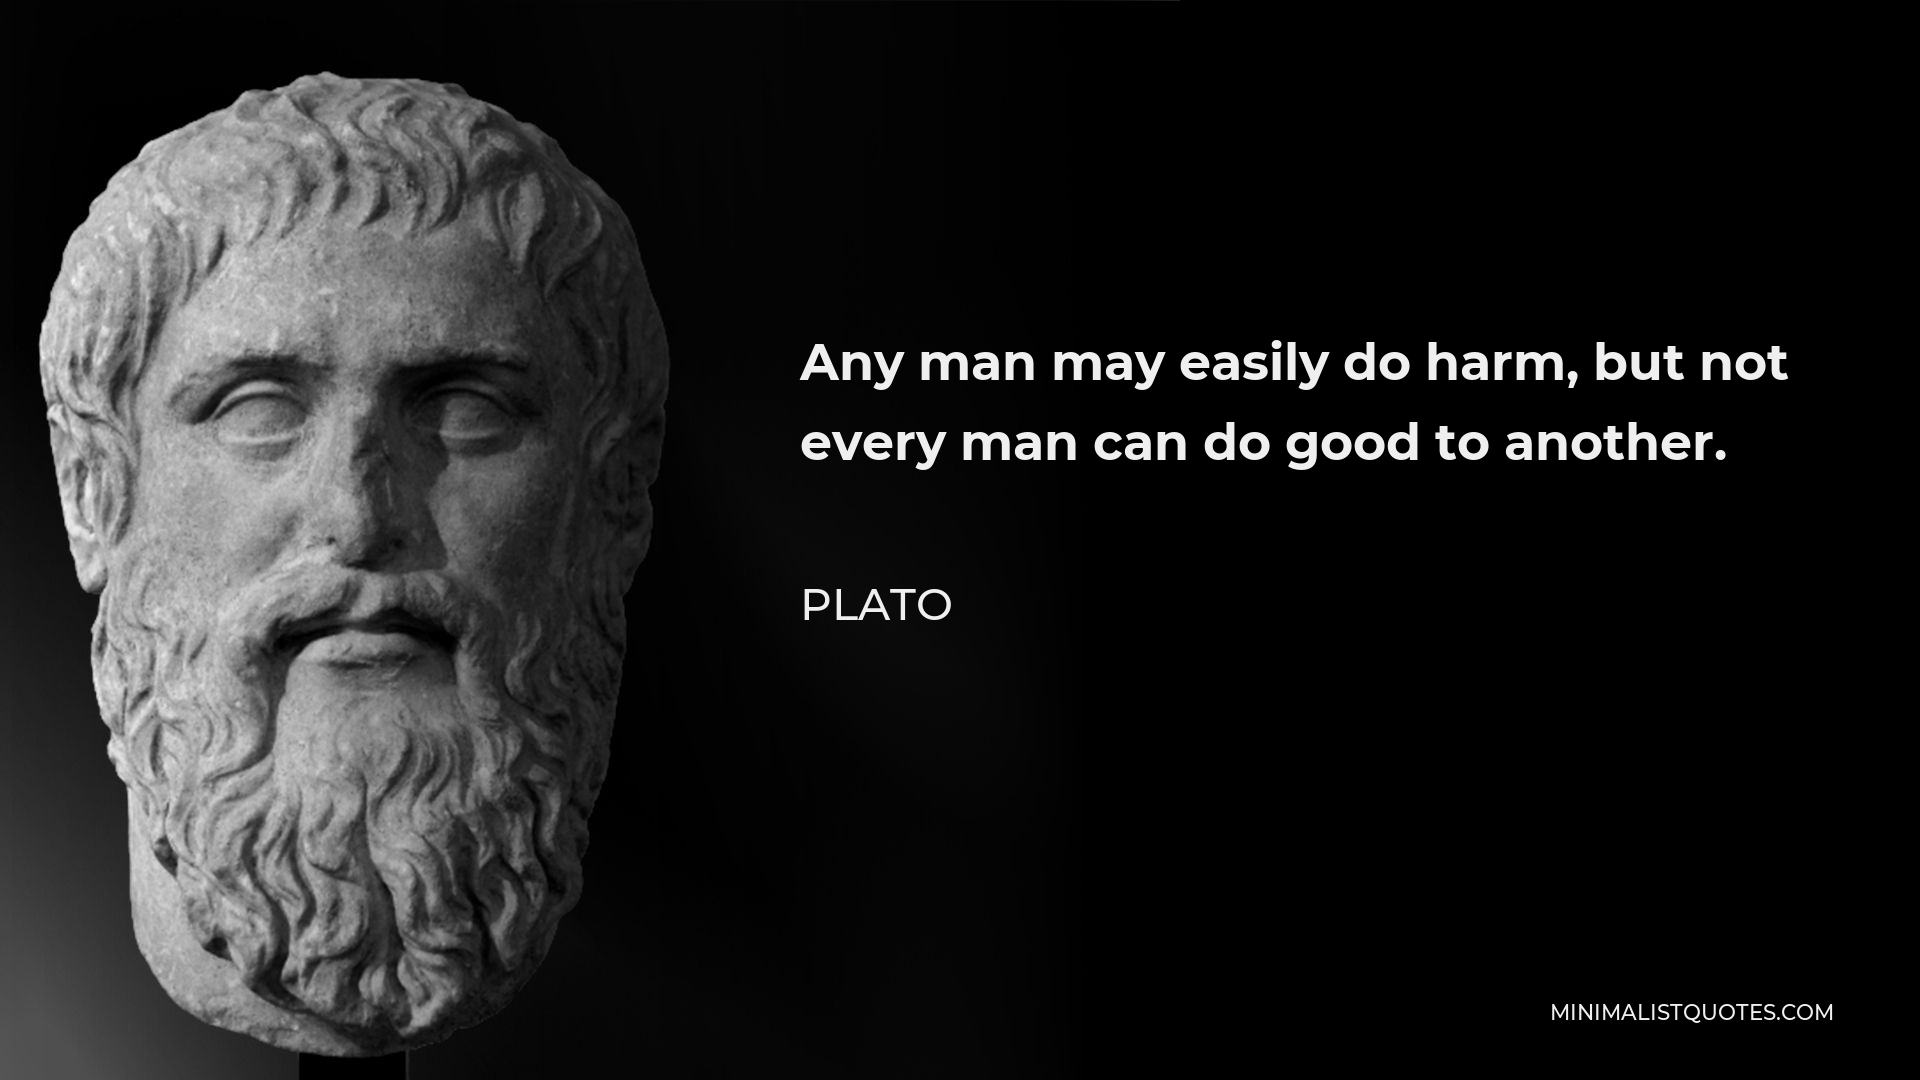 Plato Quote - Any man may easily do harm, but not every man can do good to another.